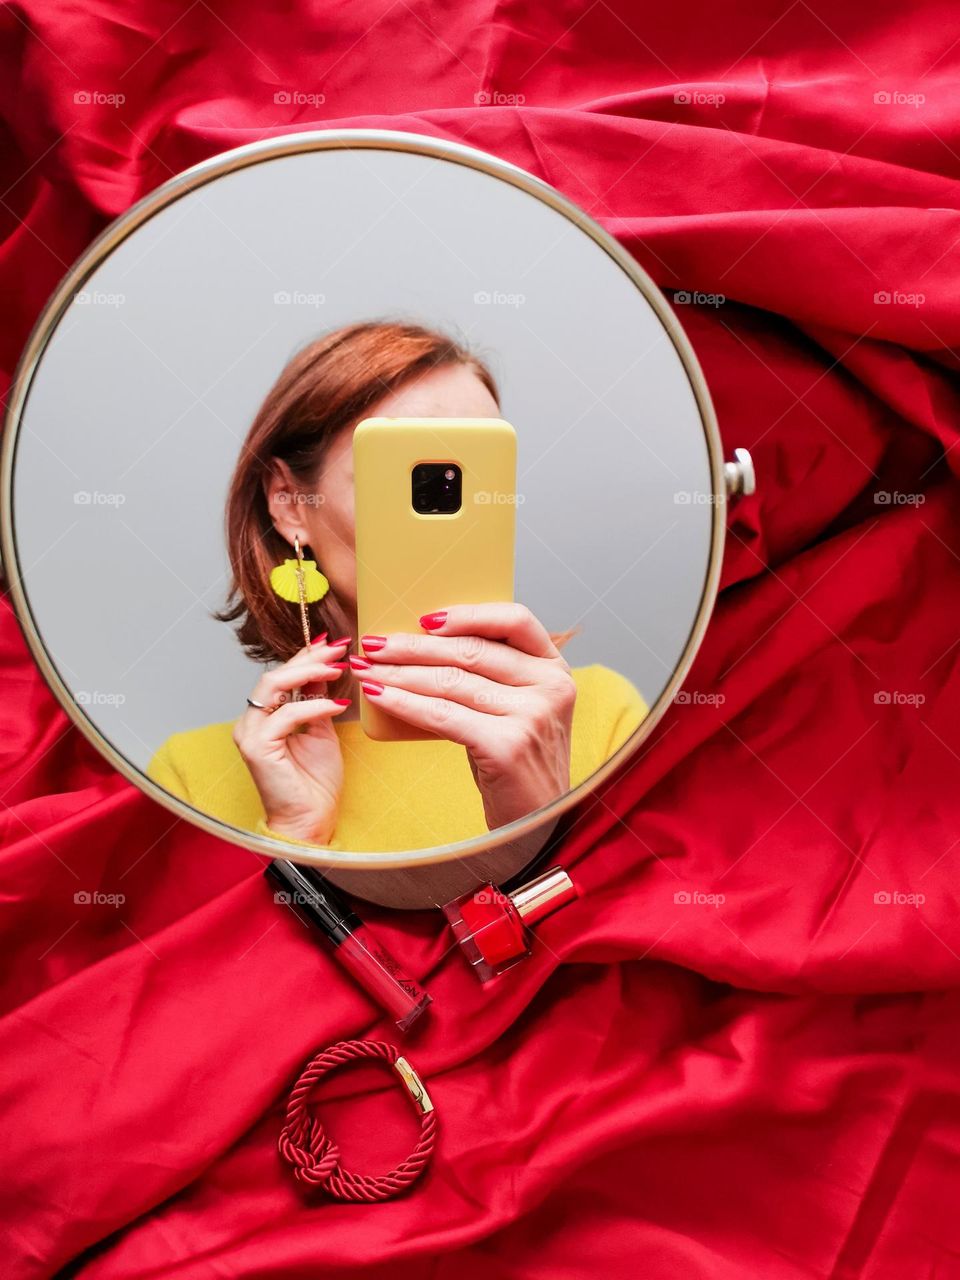 Not ordinary reflection in the mirror. Red and yellow. Huawei mate 20 pro.